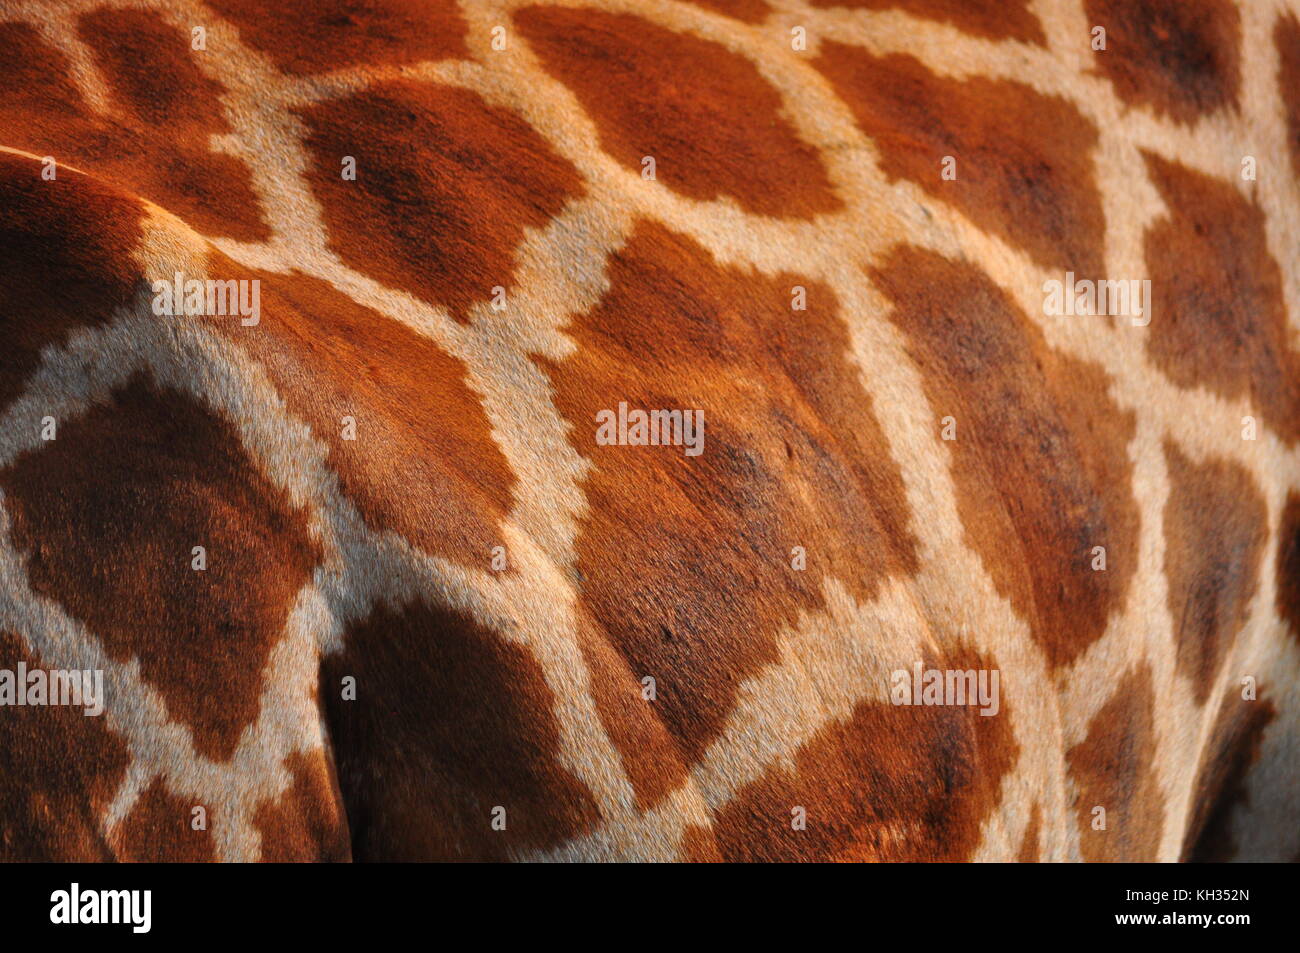 Stunning and colorful photograph of a giraffes beautiful texture and camouflage. Stock Photo